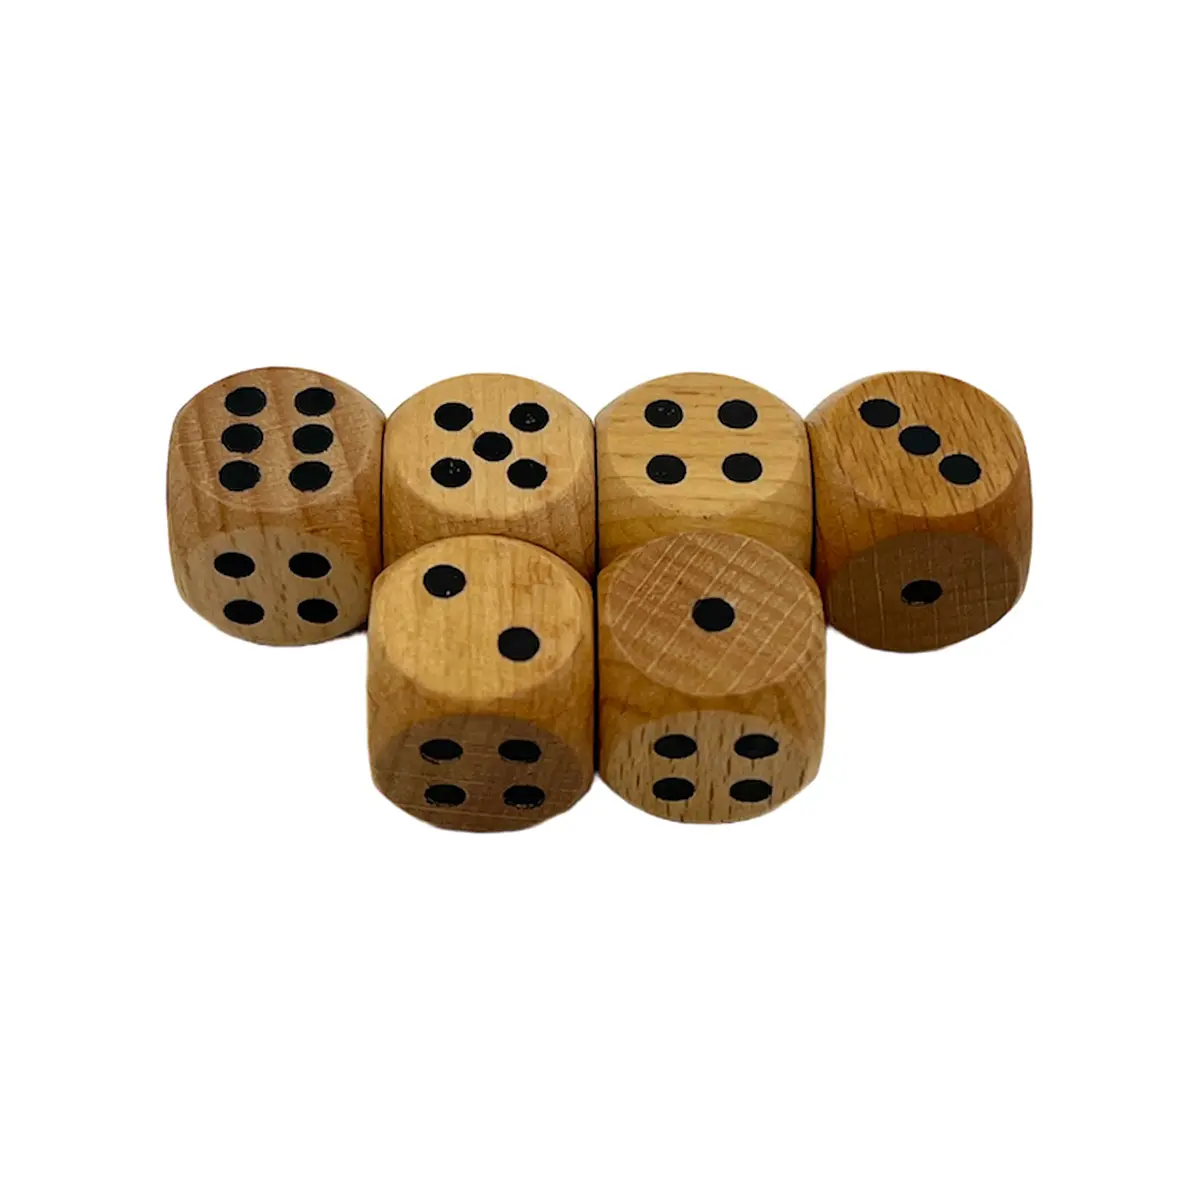 Natural Wooden Dice with Black Dots